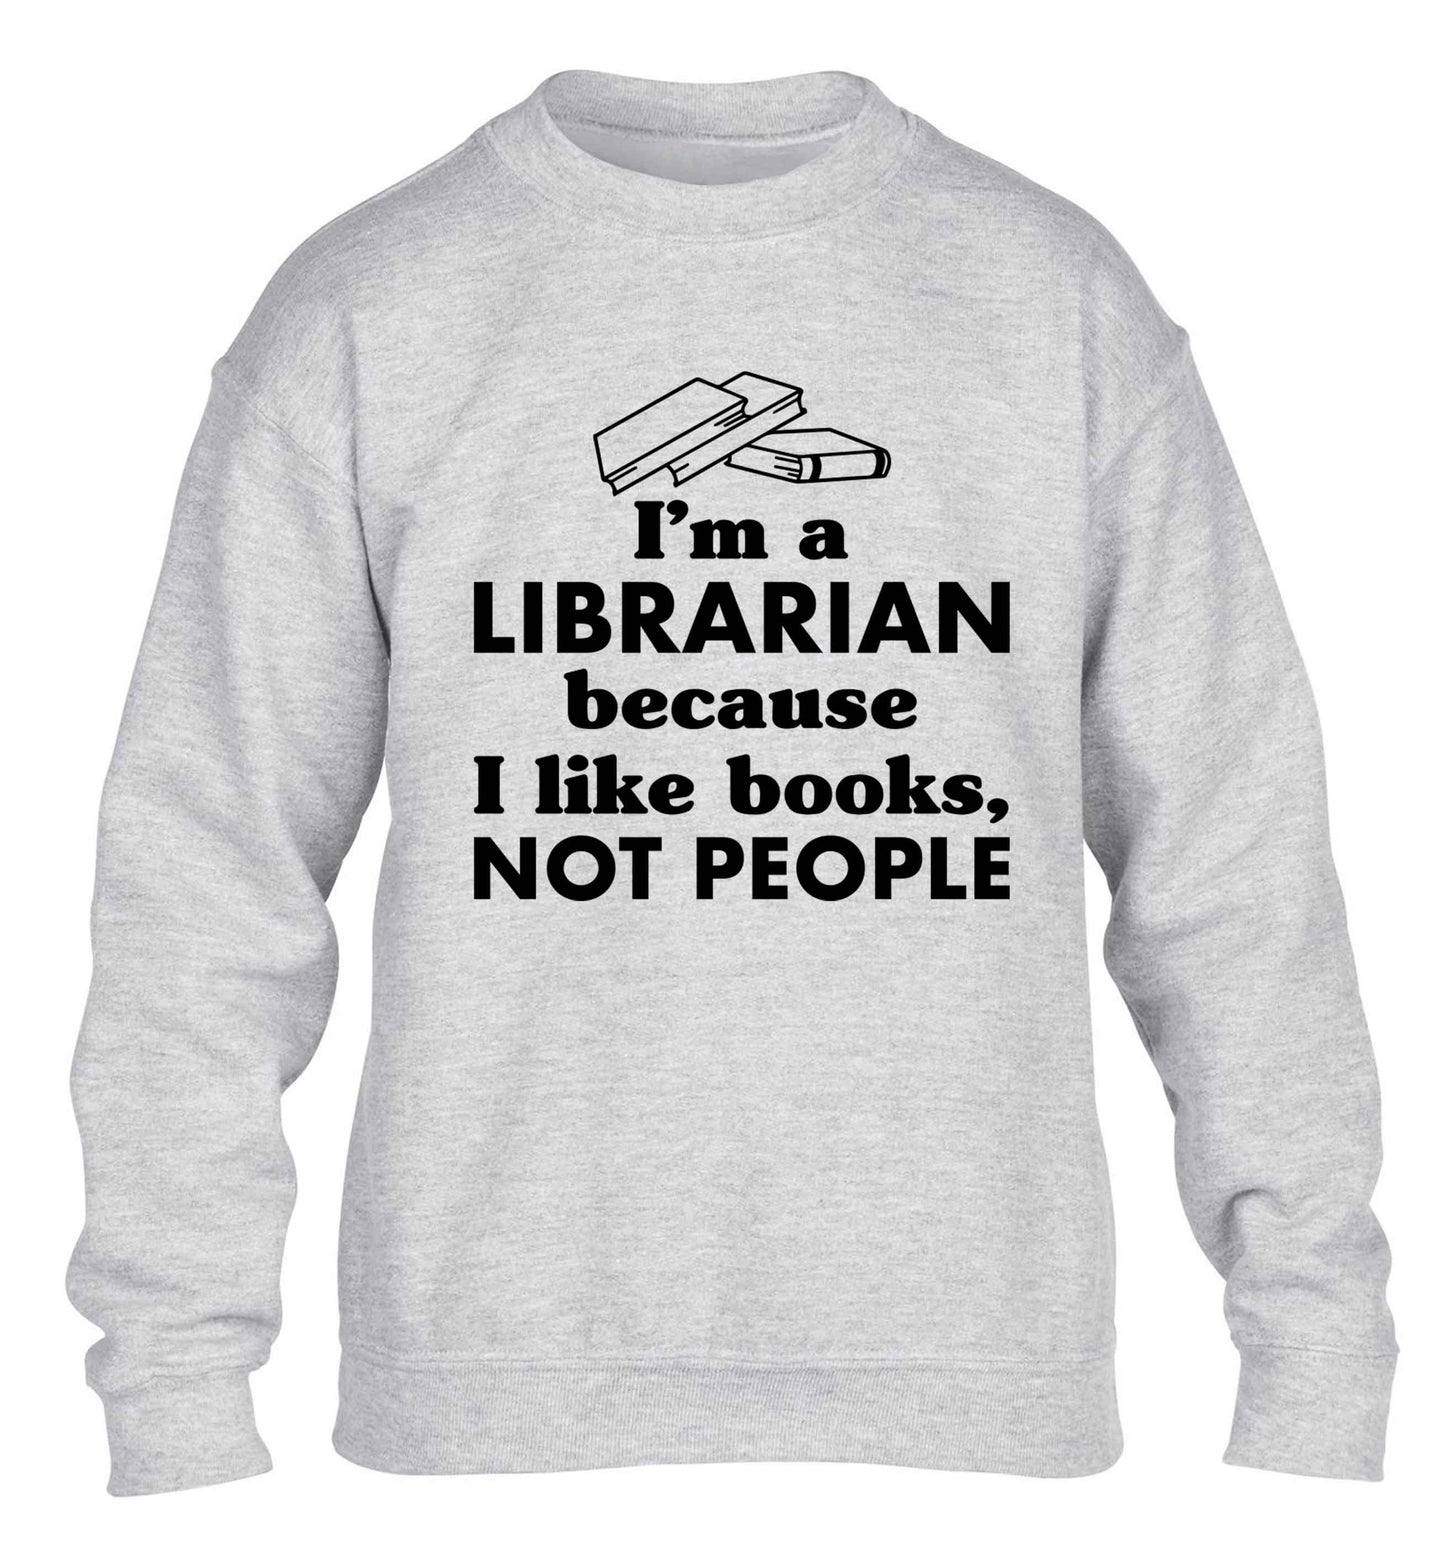 I'm a librarian because I like books not people children's grey sweater 12-13 Years